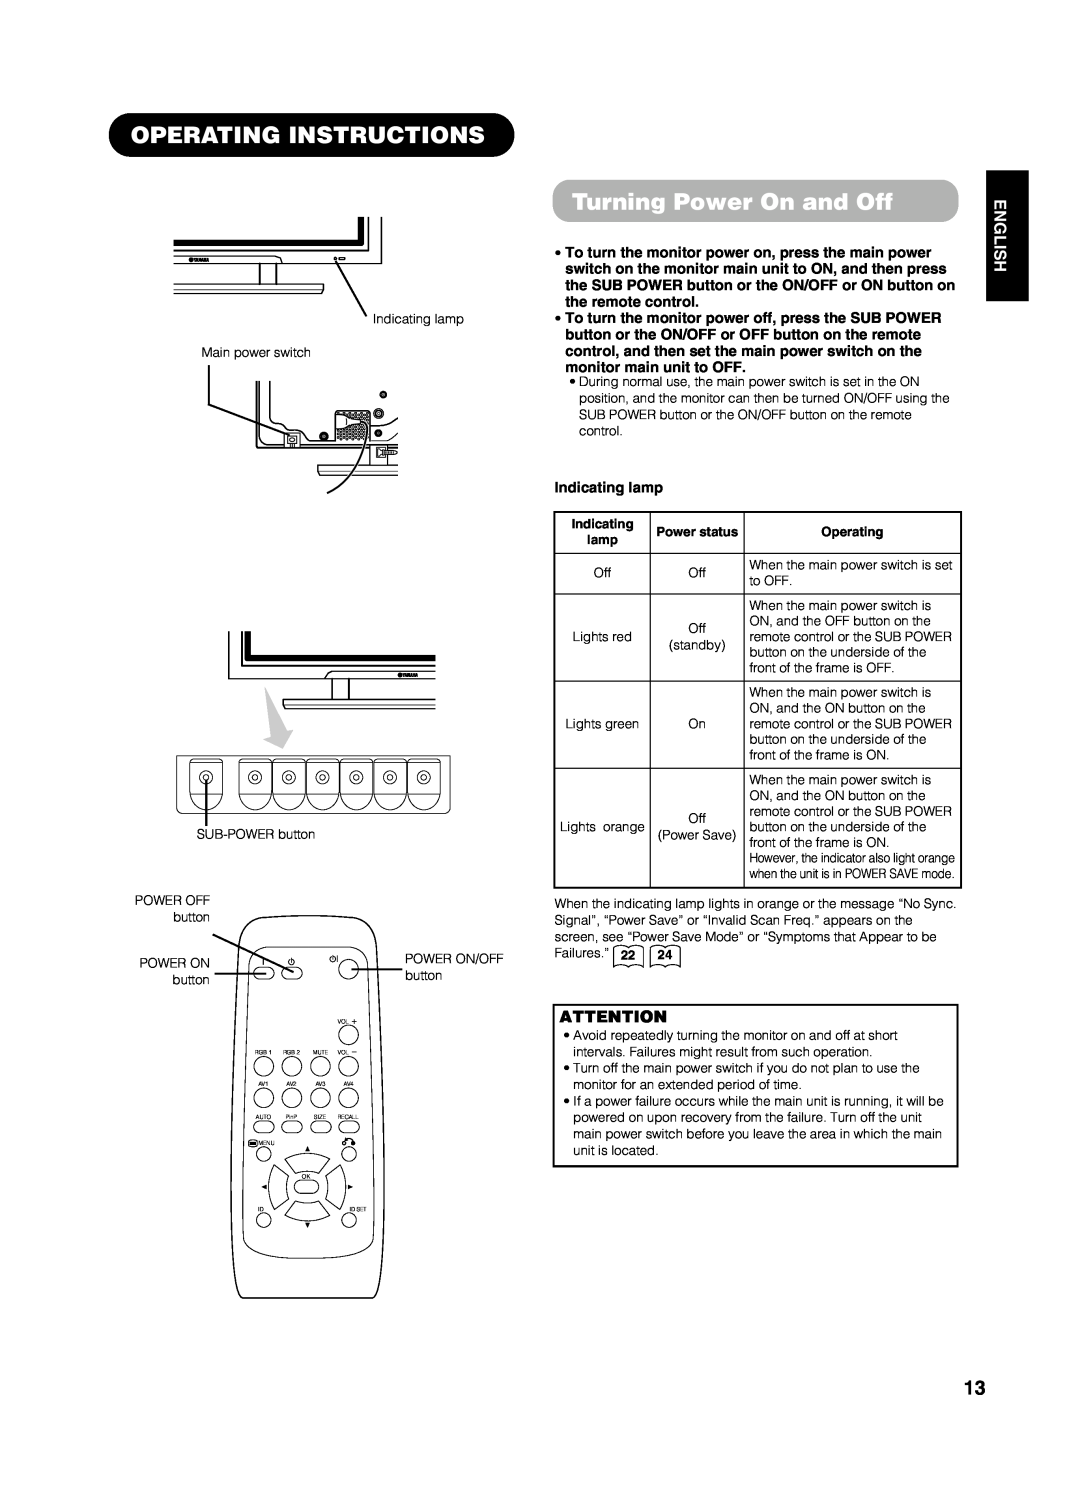 Yamaha PDM-4210E Operating Instructions, Turning Power On and Off, English, the remote control, monitor main unit to OFF 